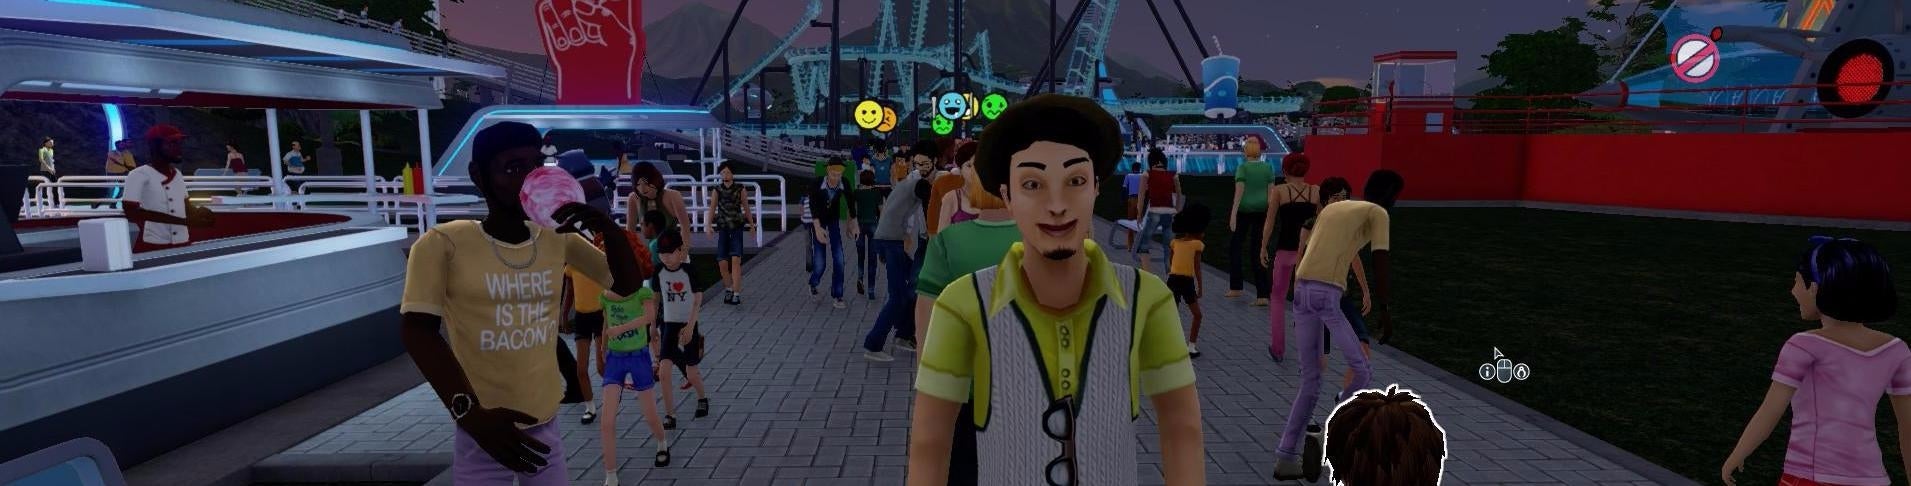 Image for Rollercoaster Tycoon World review